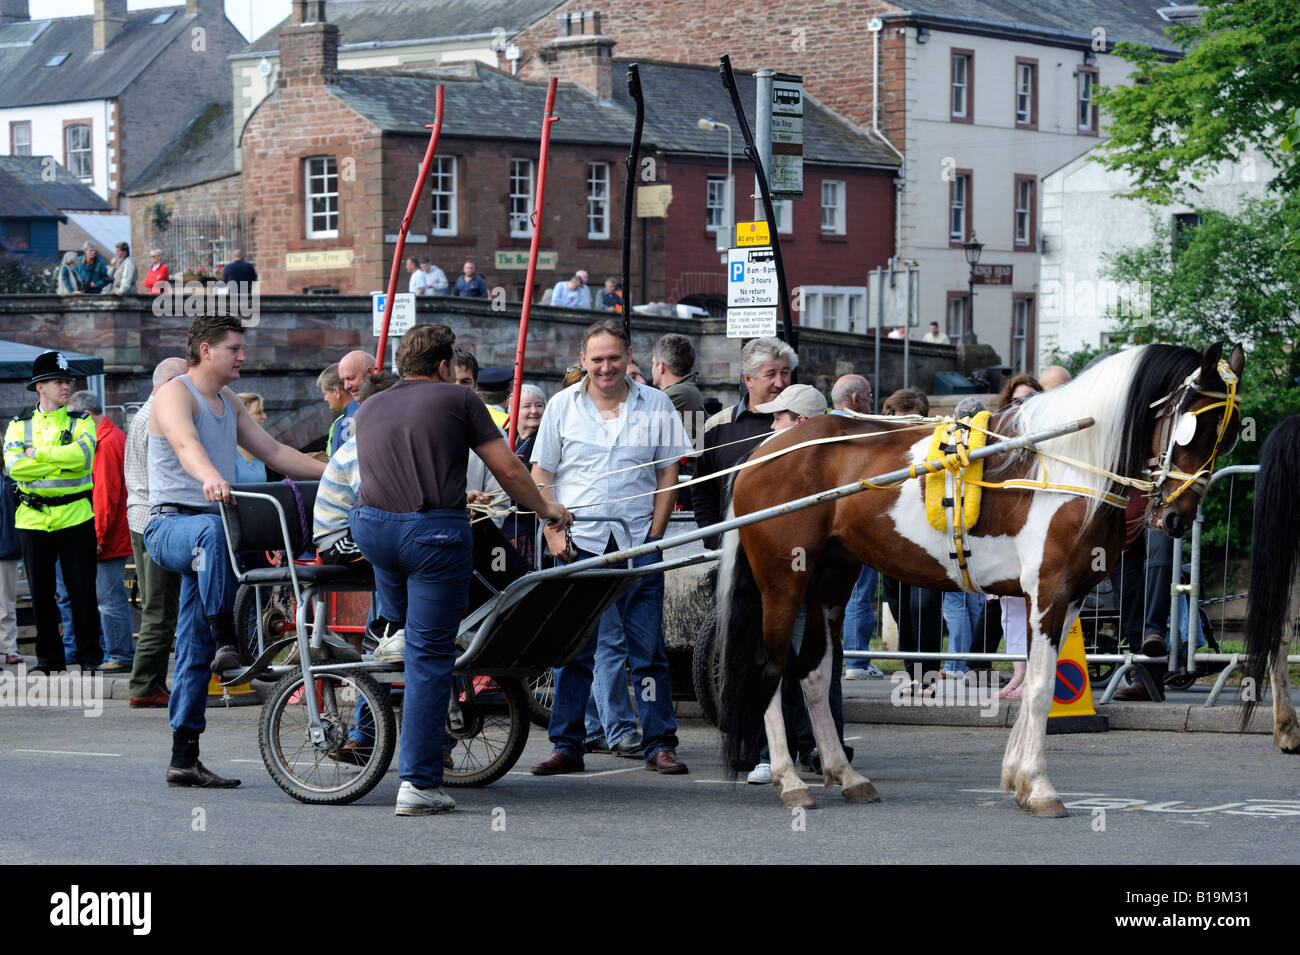 Gypsy traveller horse dealers at Appleby Horse Fair. Appleby-in-Westmorland, Cumbria, England, United Kingdom, Europe. Stock Photo